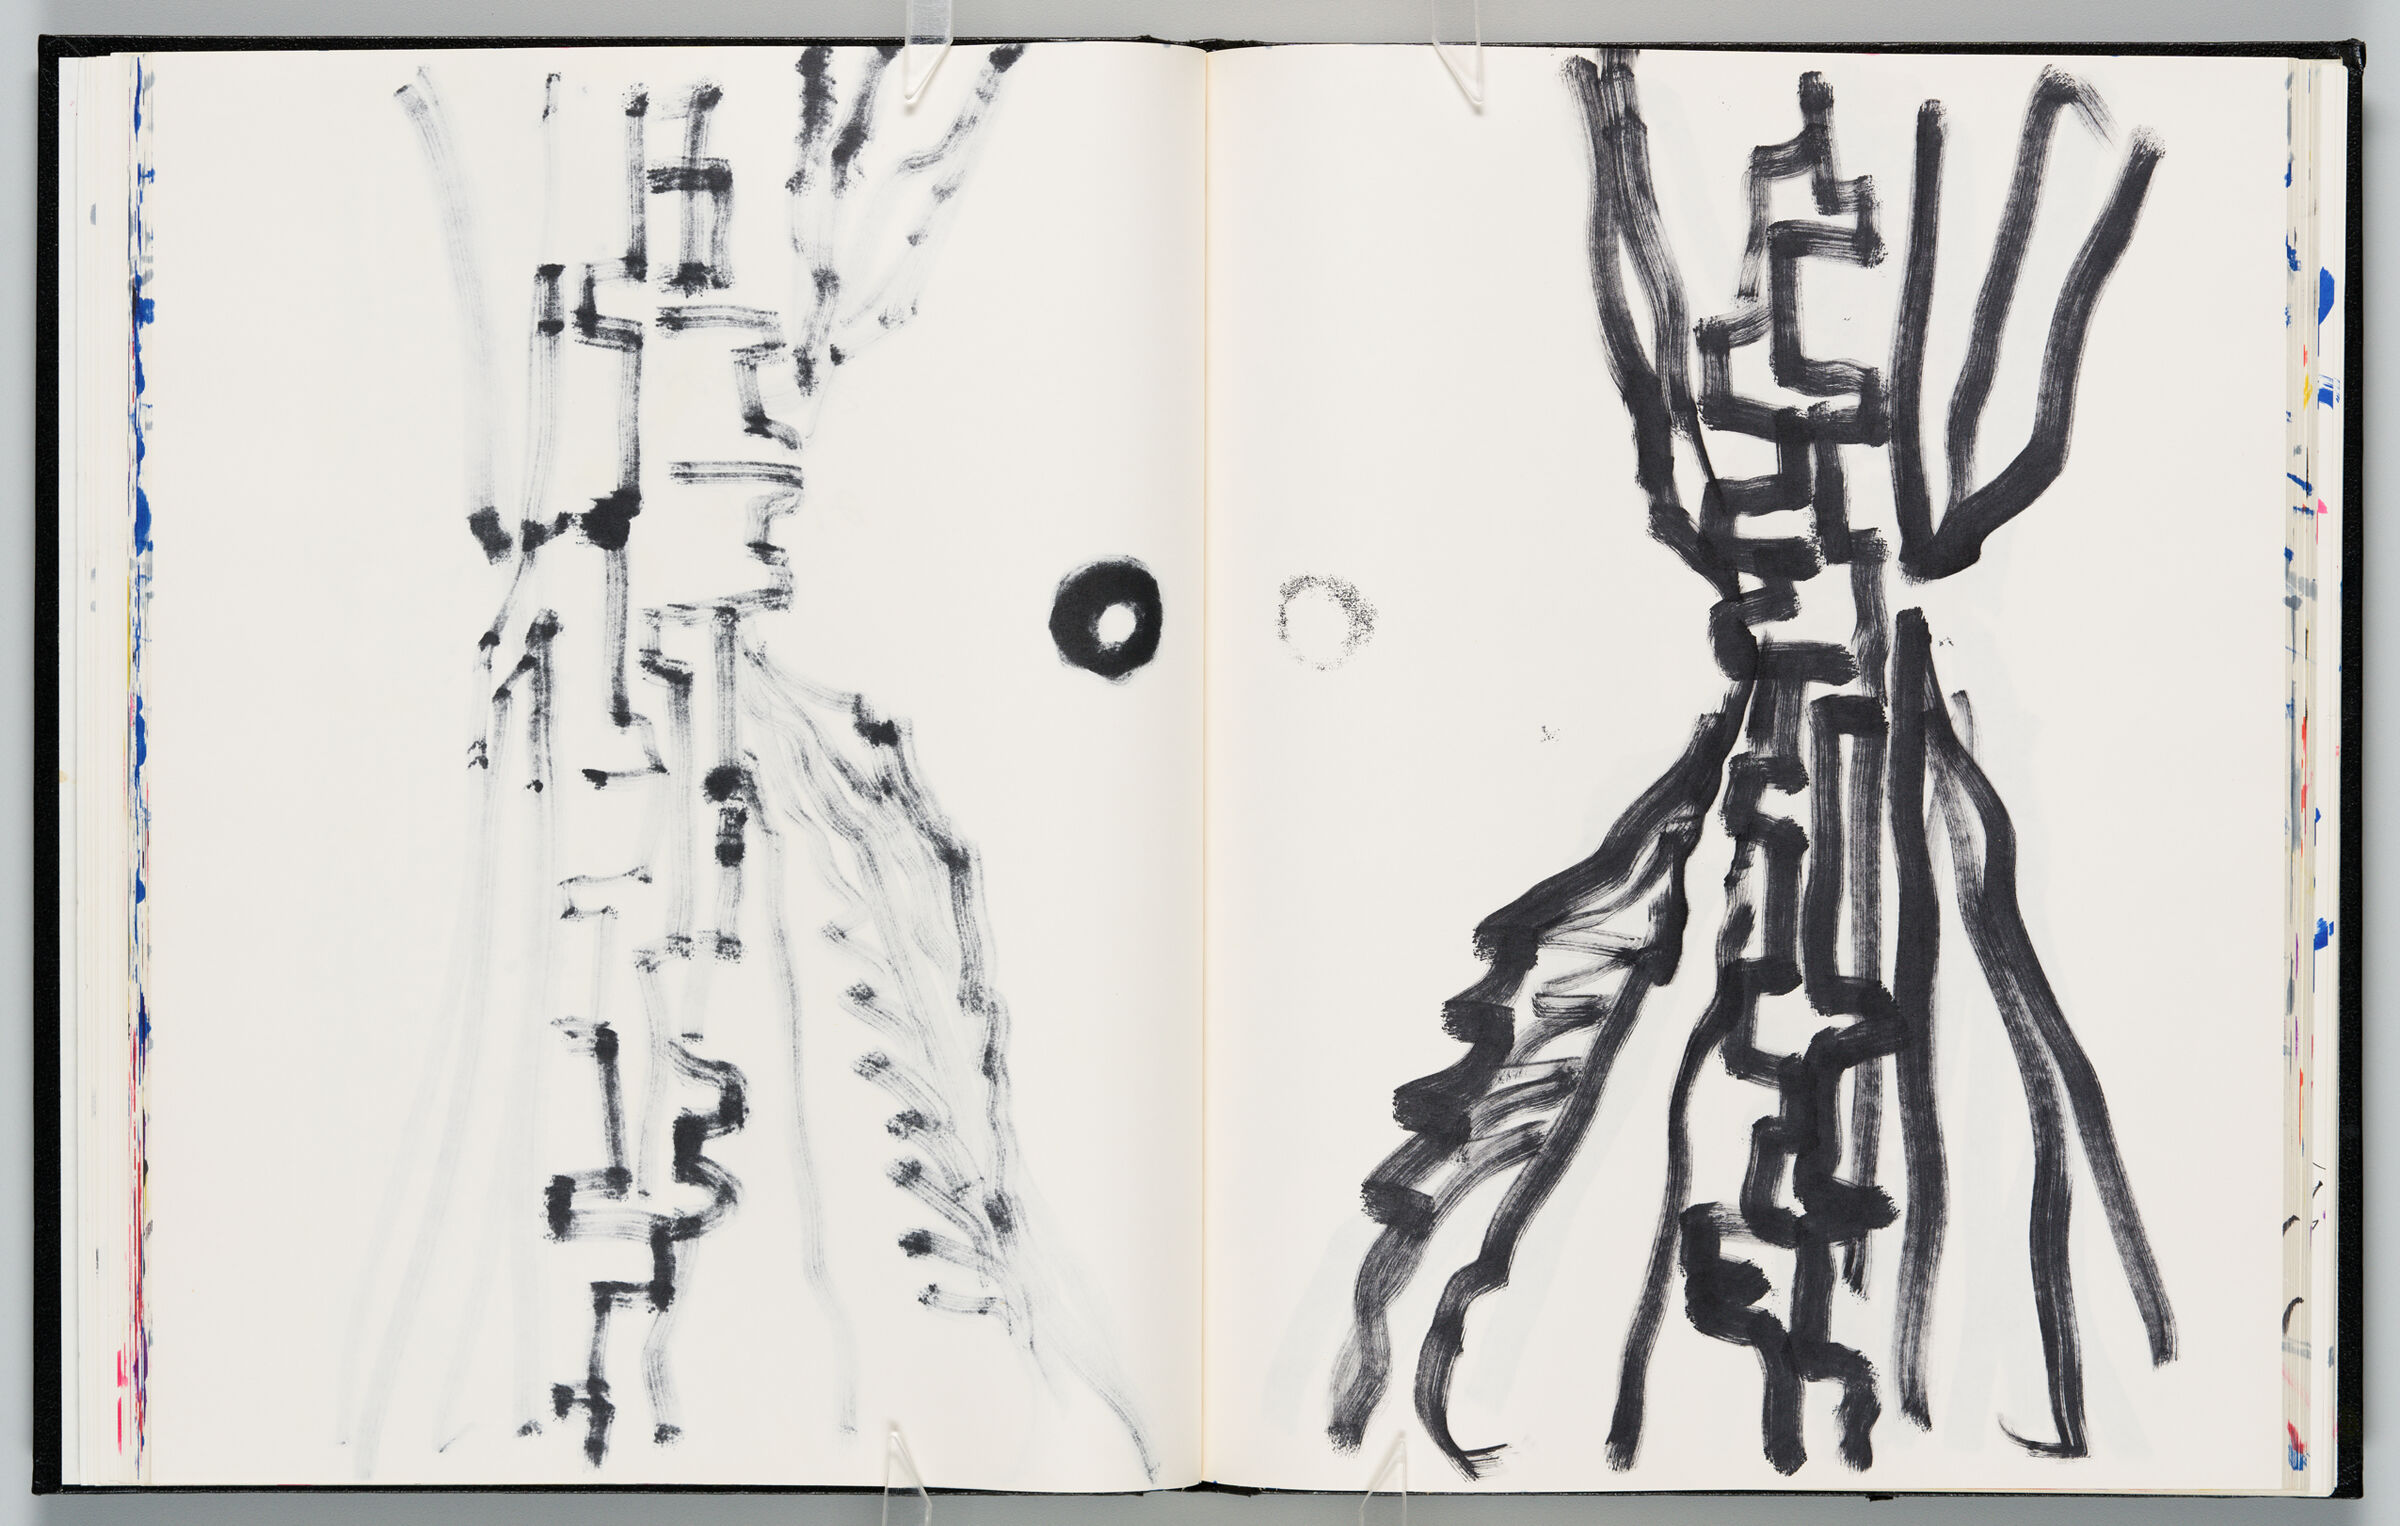 Untitled (Bleed-Through Of Previous Page, Left Page); Untitled (View Of Zagora With Color Transfer, Right Page)